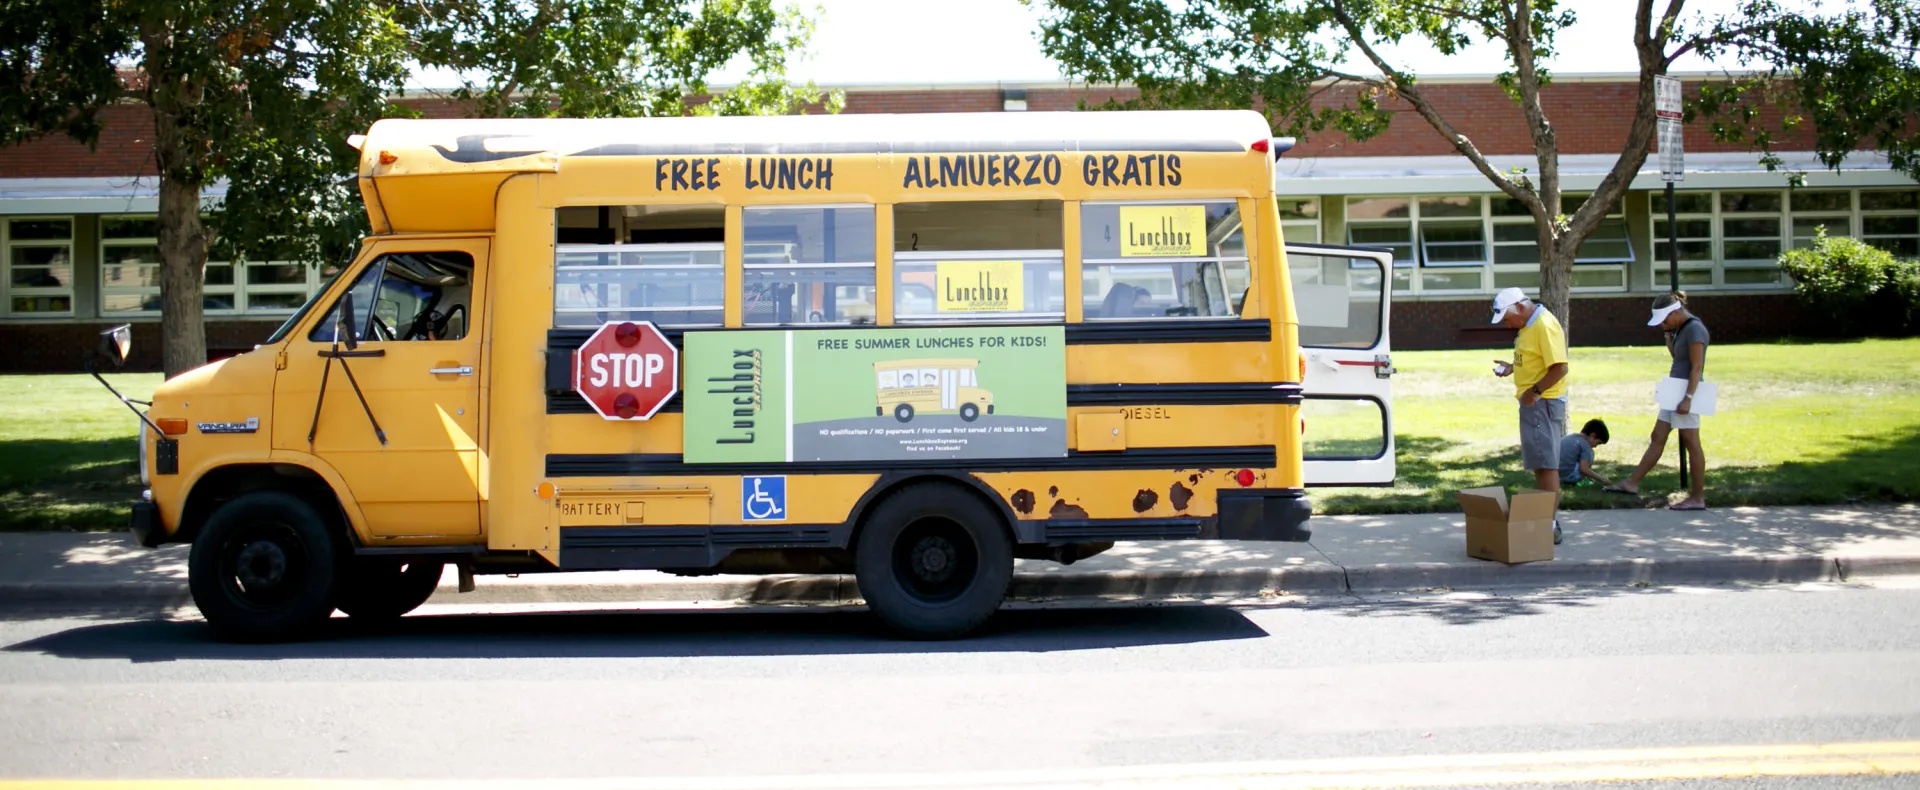 School bus with free lunch sign